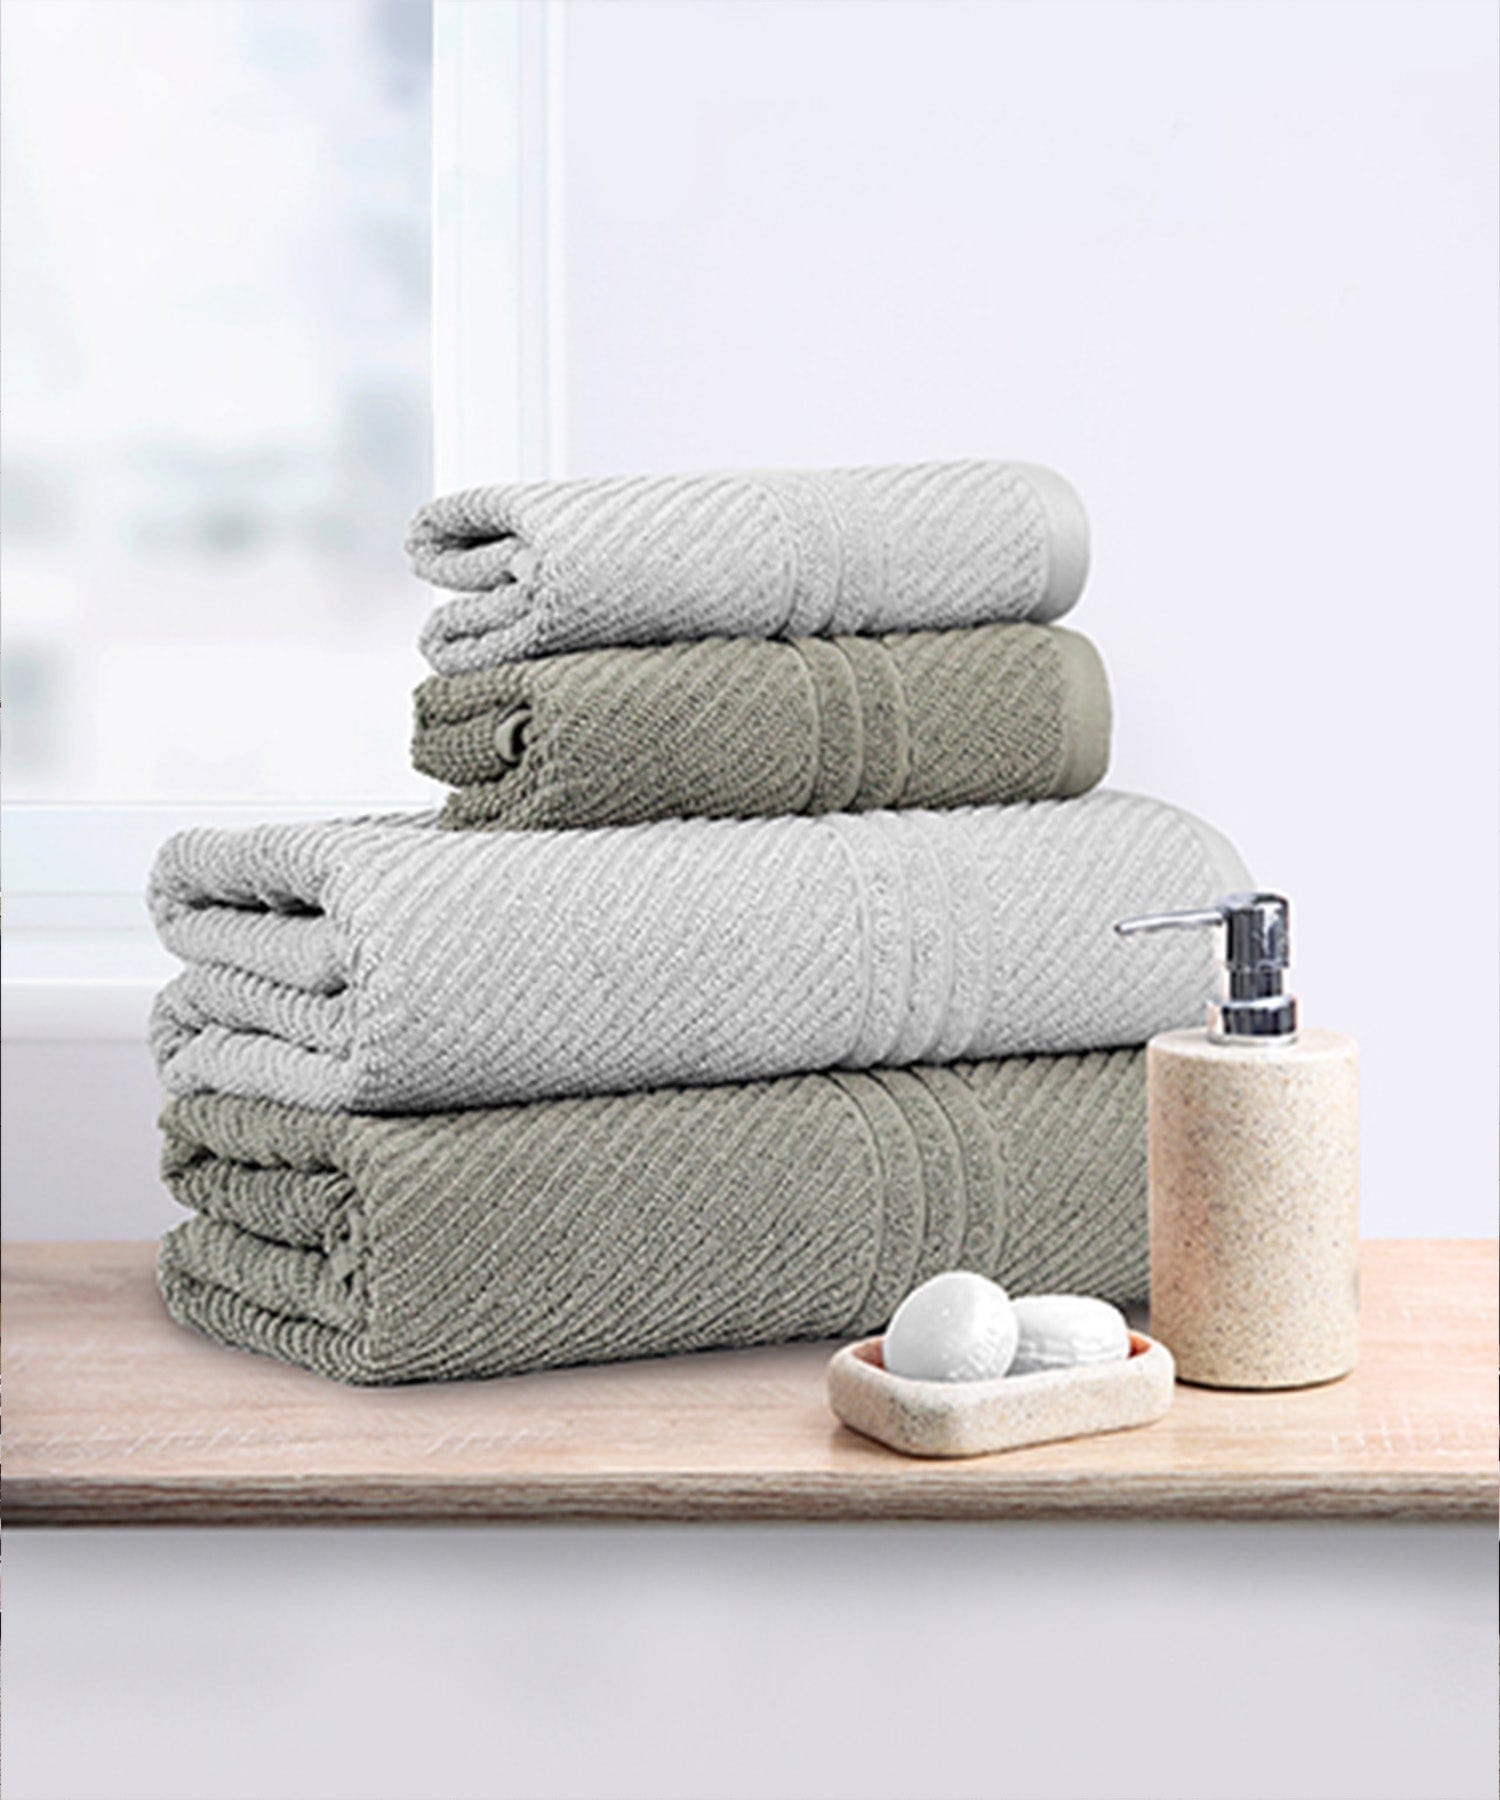 AROMA TOWEL,100% Cotton,Durable,Super Soft, LILY